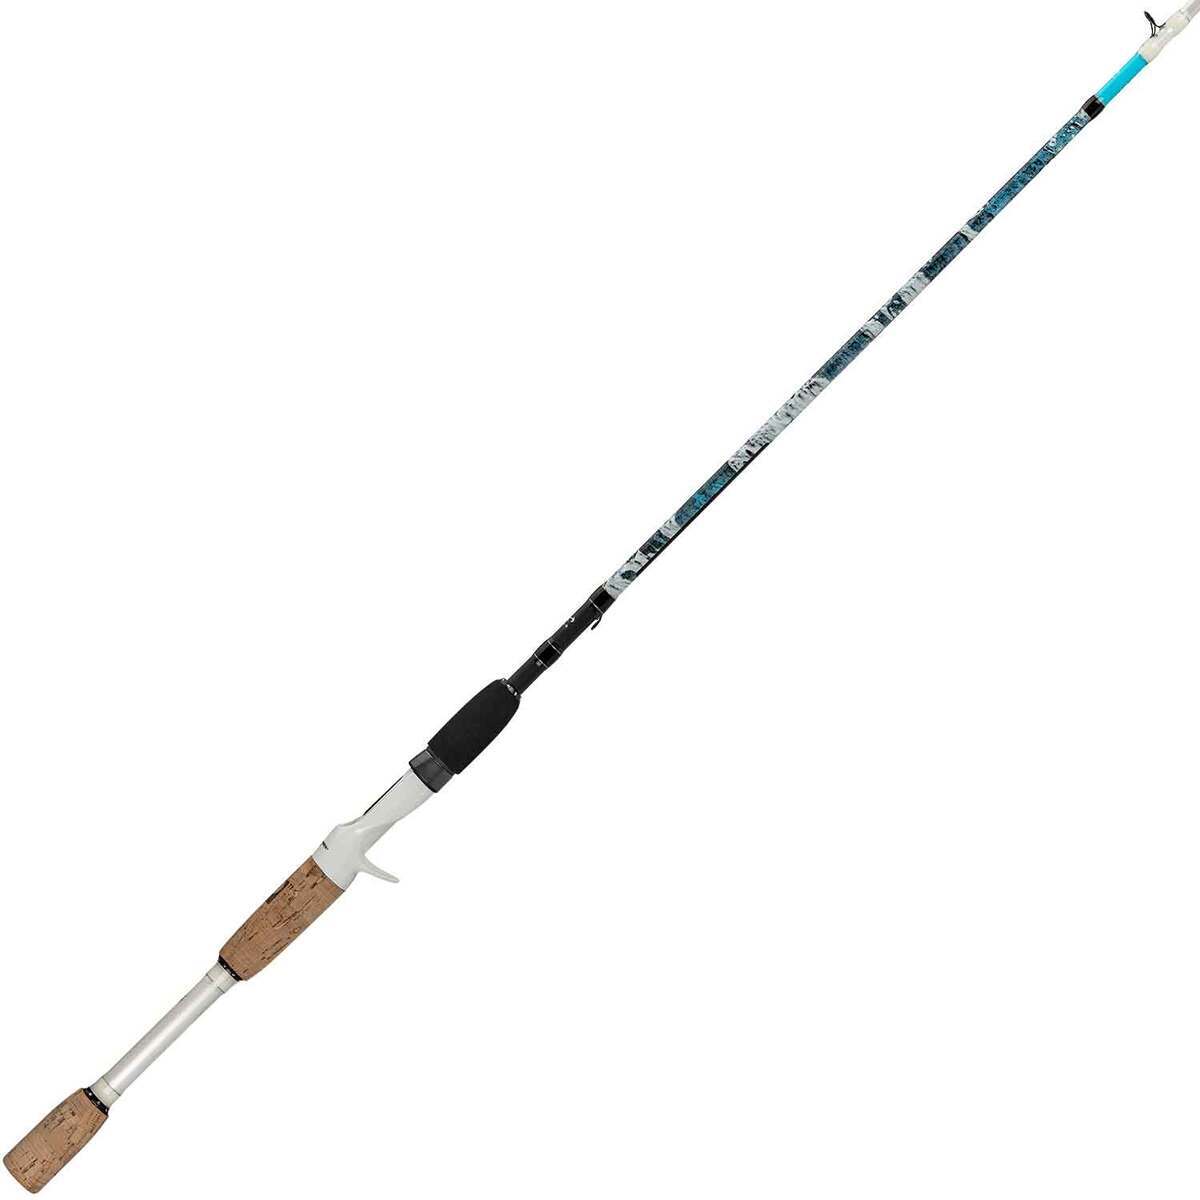 Profishiency Hannah Wesley Signature Series Spinning Rod and Reel Combo -  6ft 6in, Medium Power, 2pc